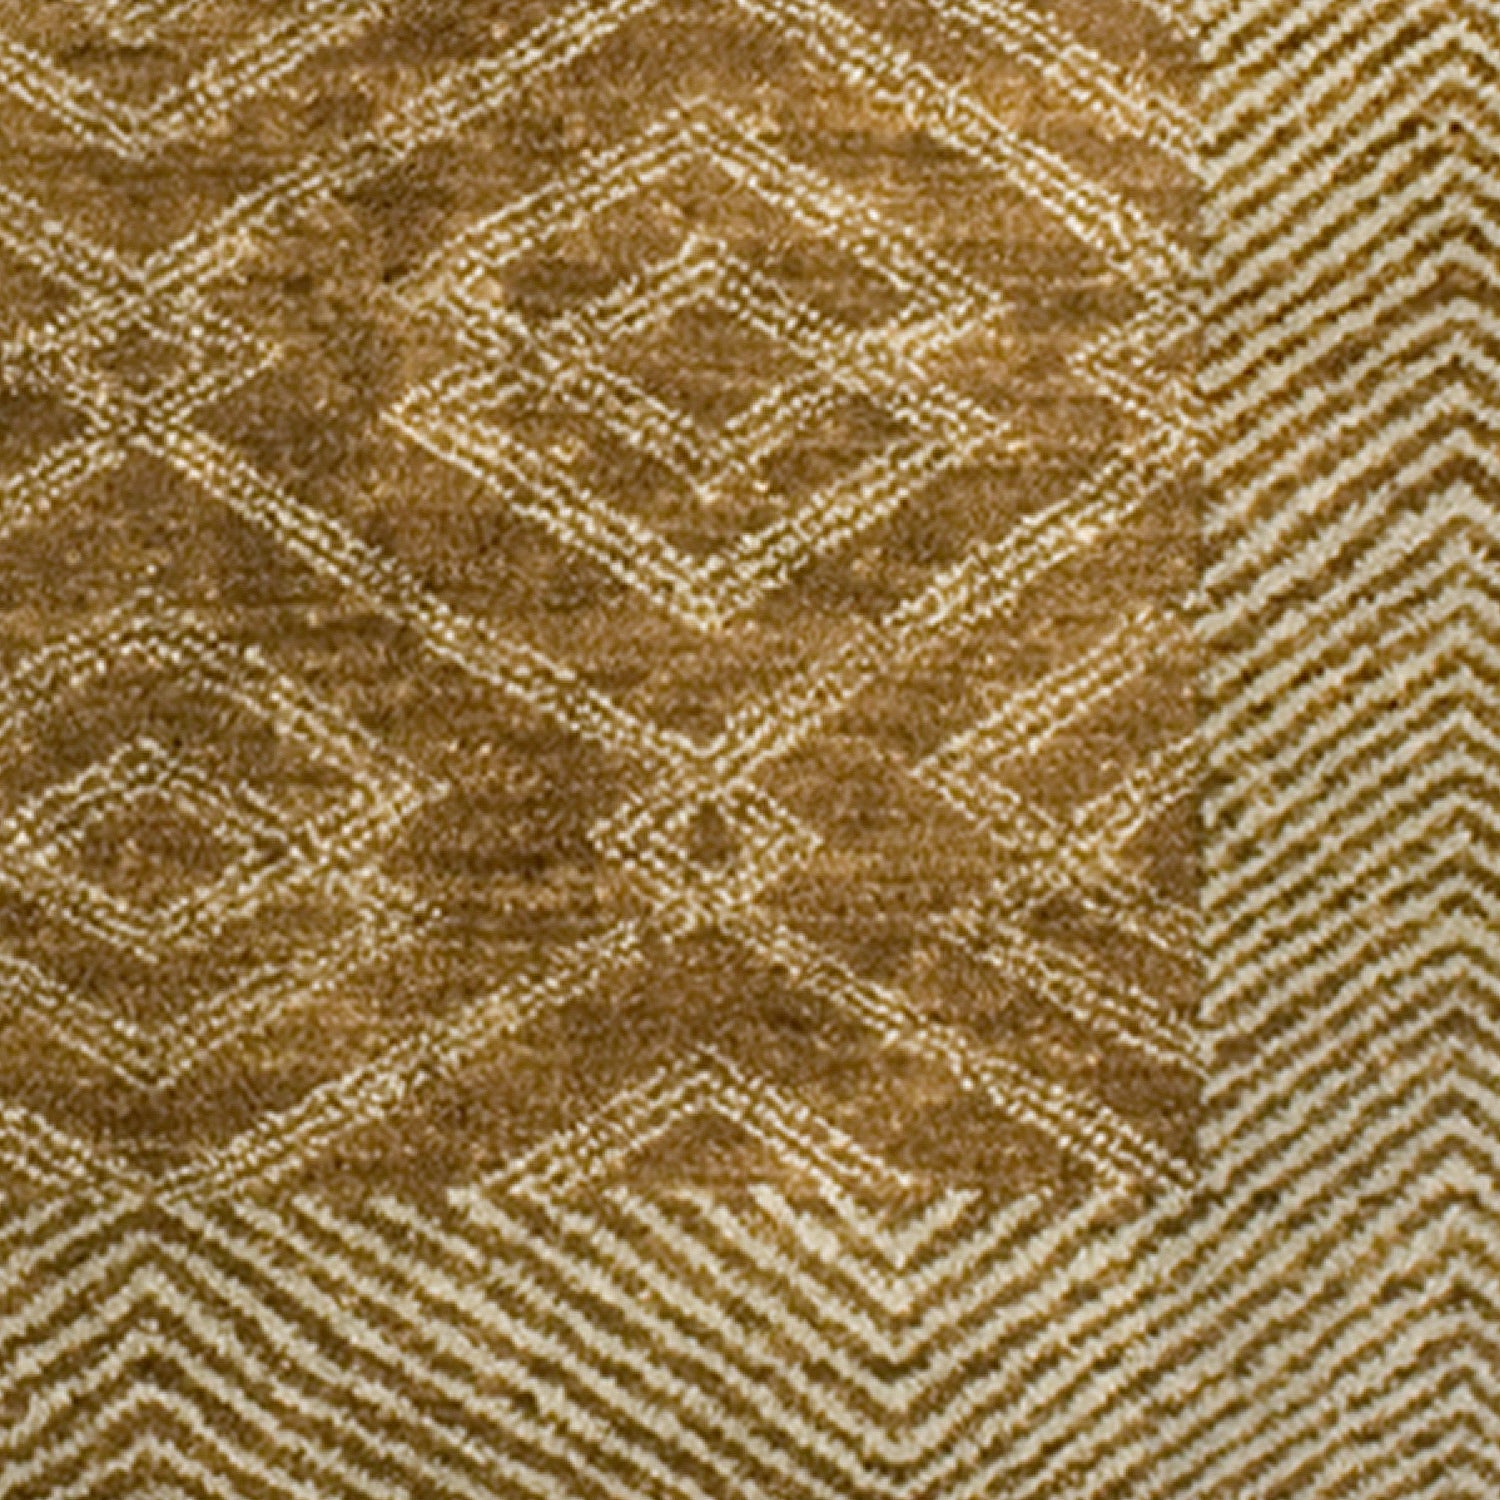 Detail of a woven high-pile rug in an interlocking diamond pattern with a dense stripe border. Pattern is white on a tan field.